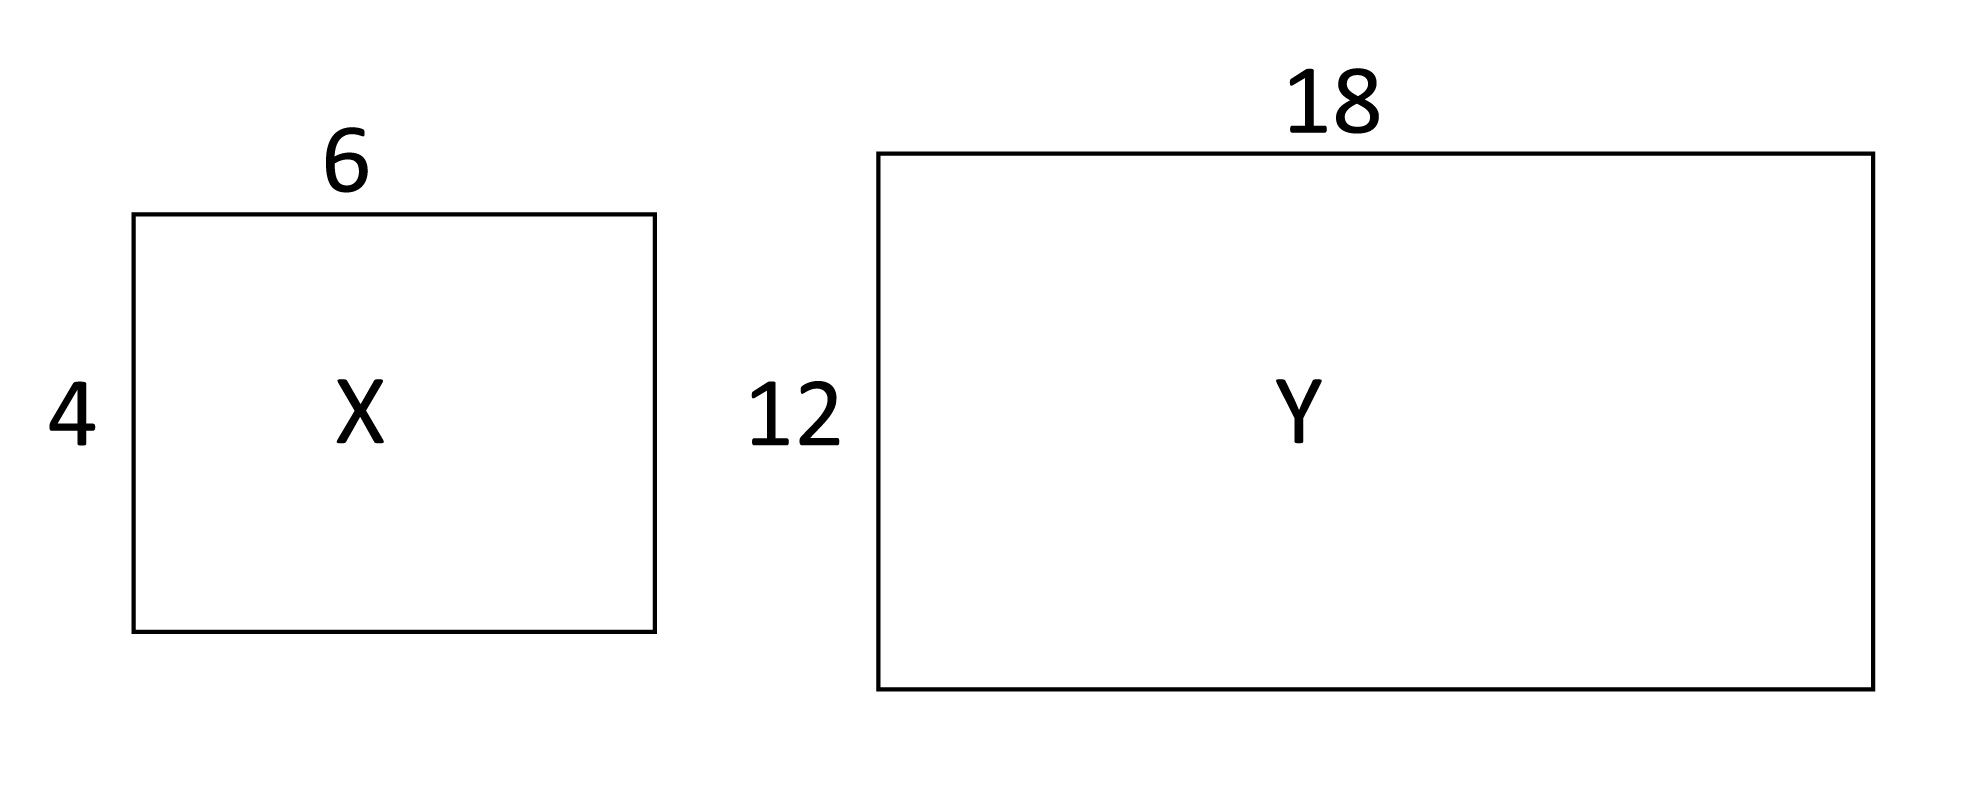 left rectangle X with length 6 and width 4, right rectangle Y with length 18 and width 12